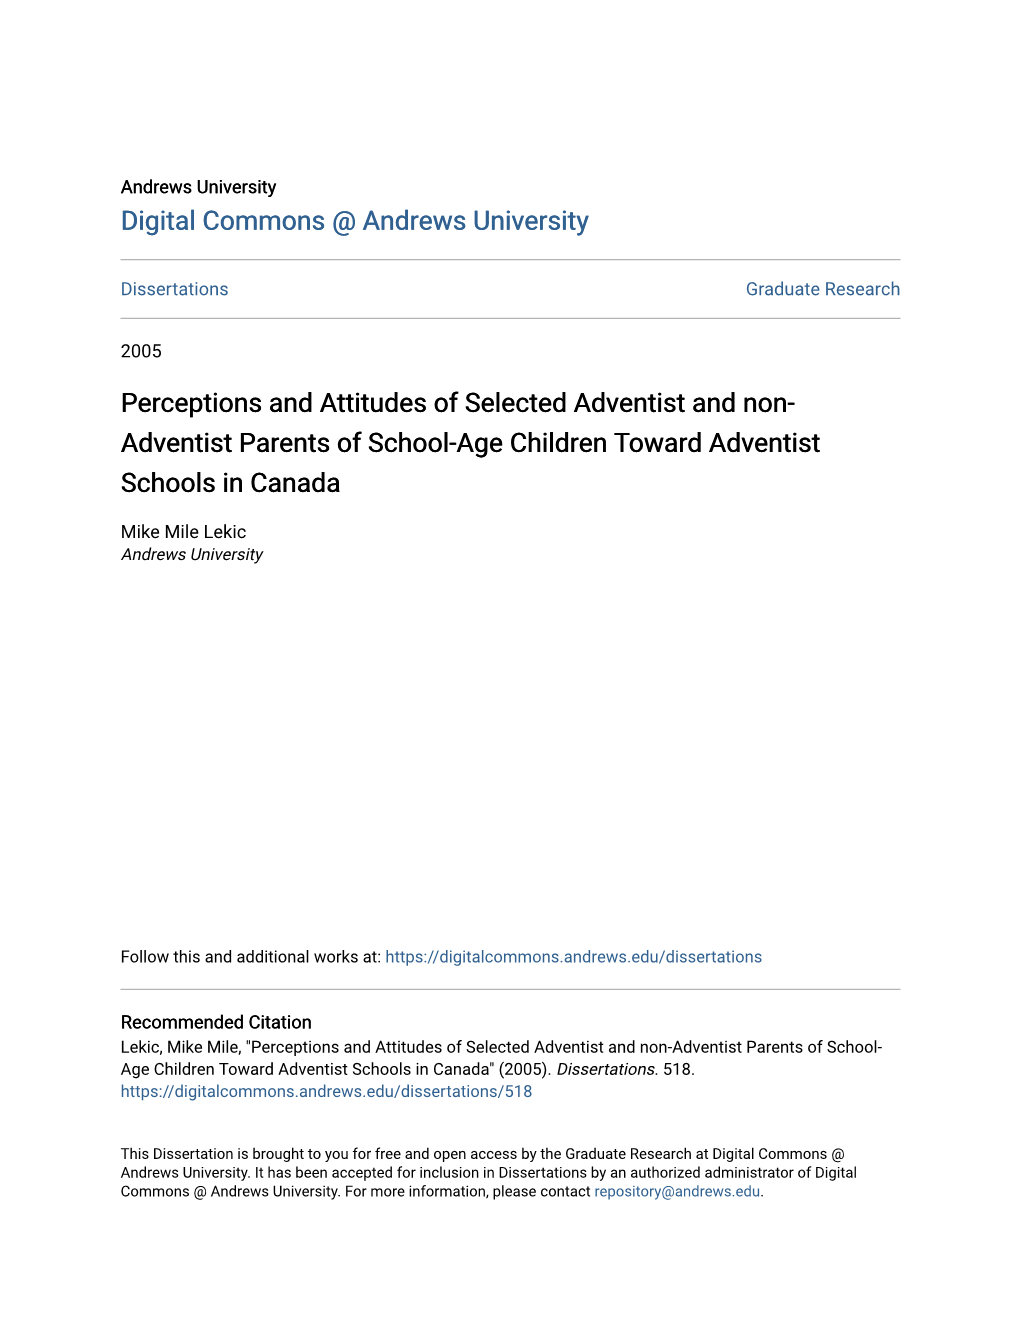 Perceptions and Attitudes of Selected Adventist and Non-Adventist Parents of School- Age Children Toward Adventist Schools in Canada" (2005)